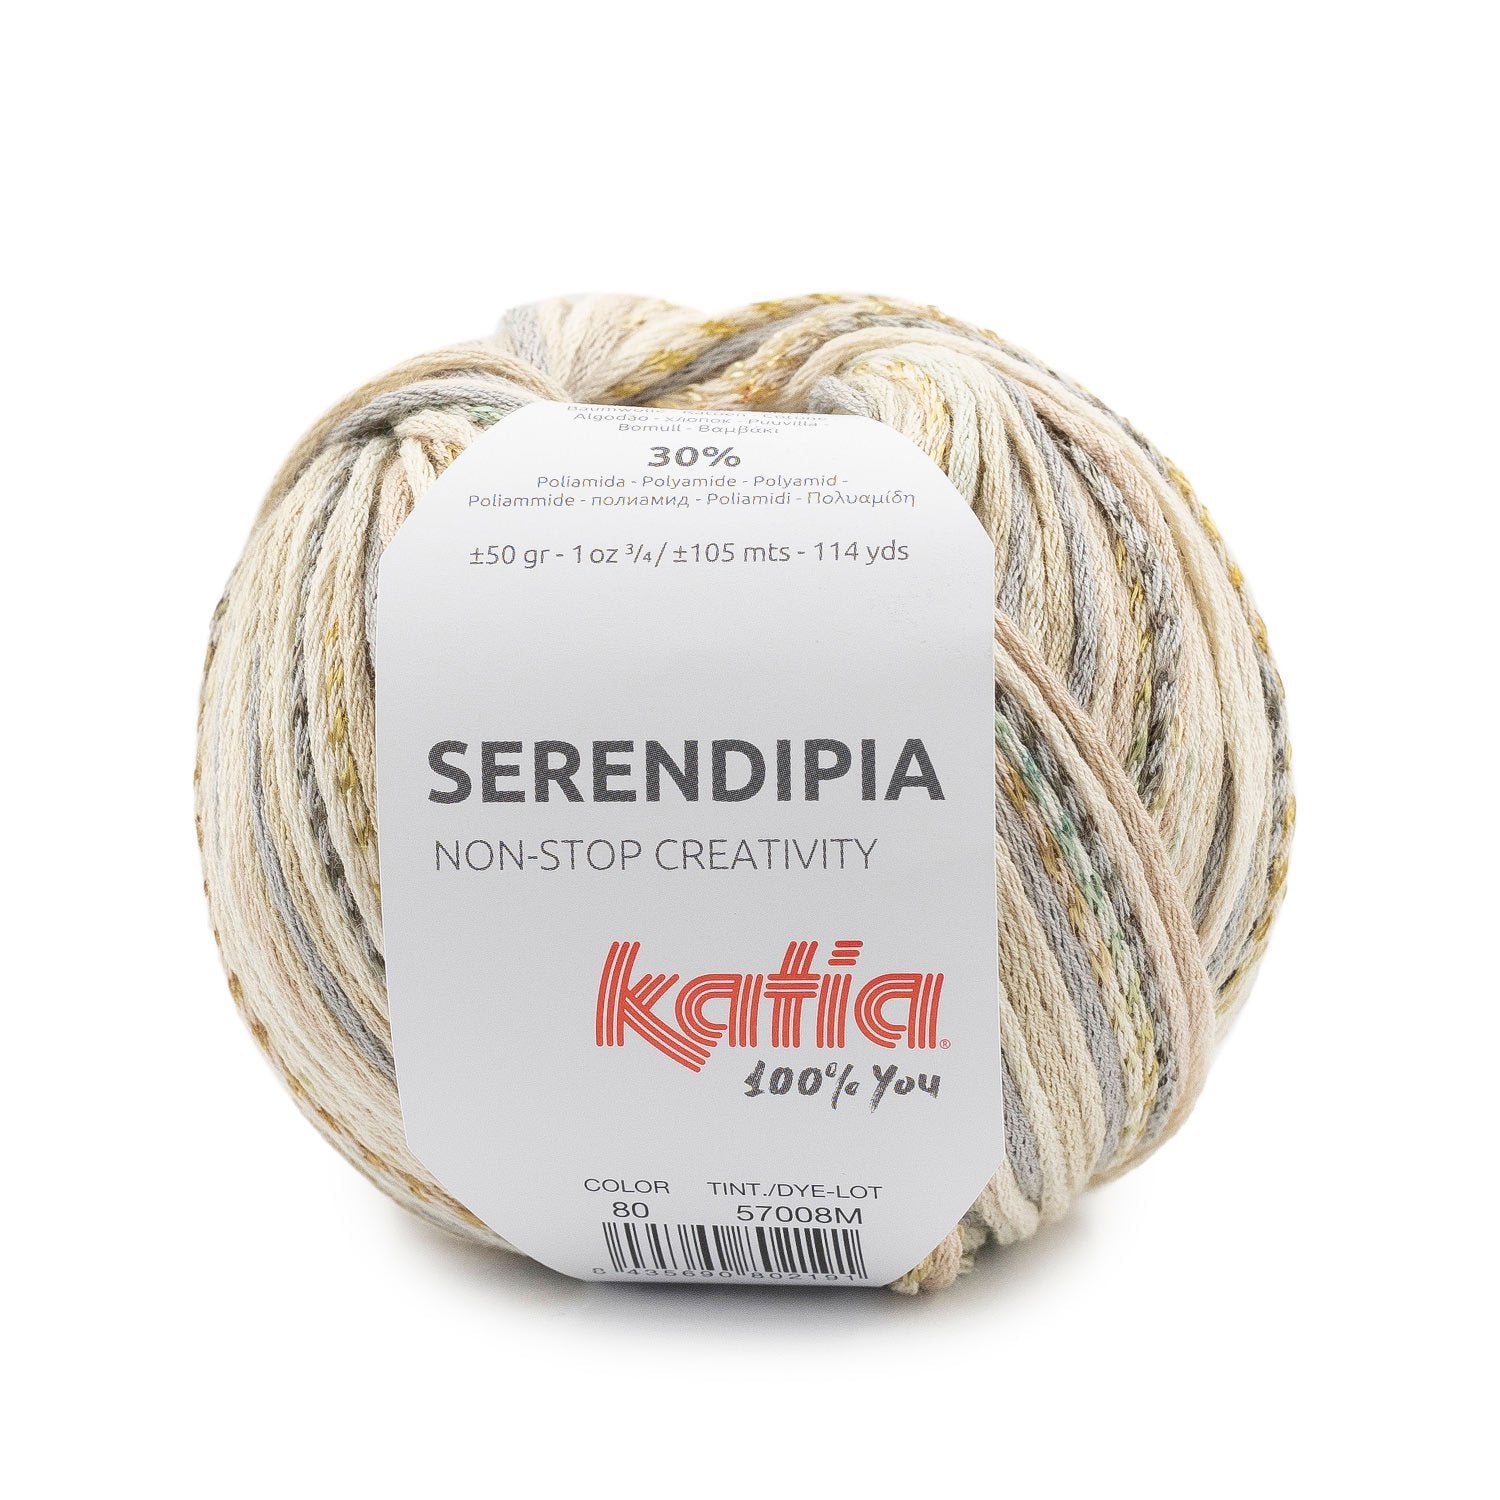 Katia Serendipia cotton yarn in the look of a multicolored ribbon to knit fresh and colorful garments in spring and summer